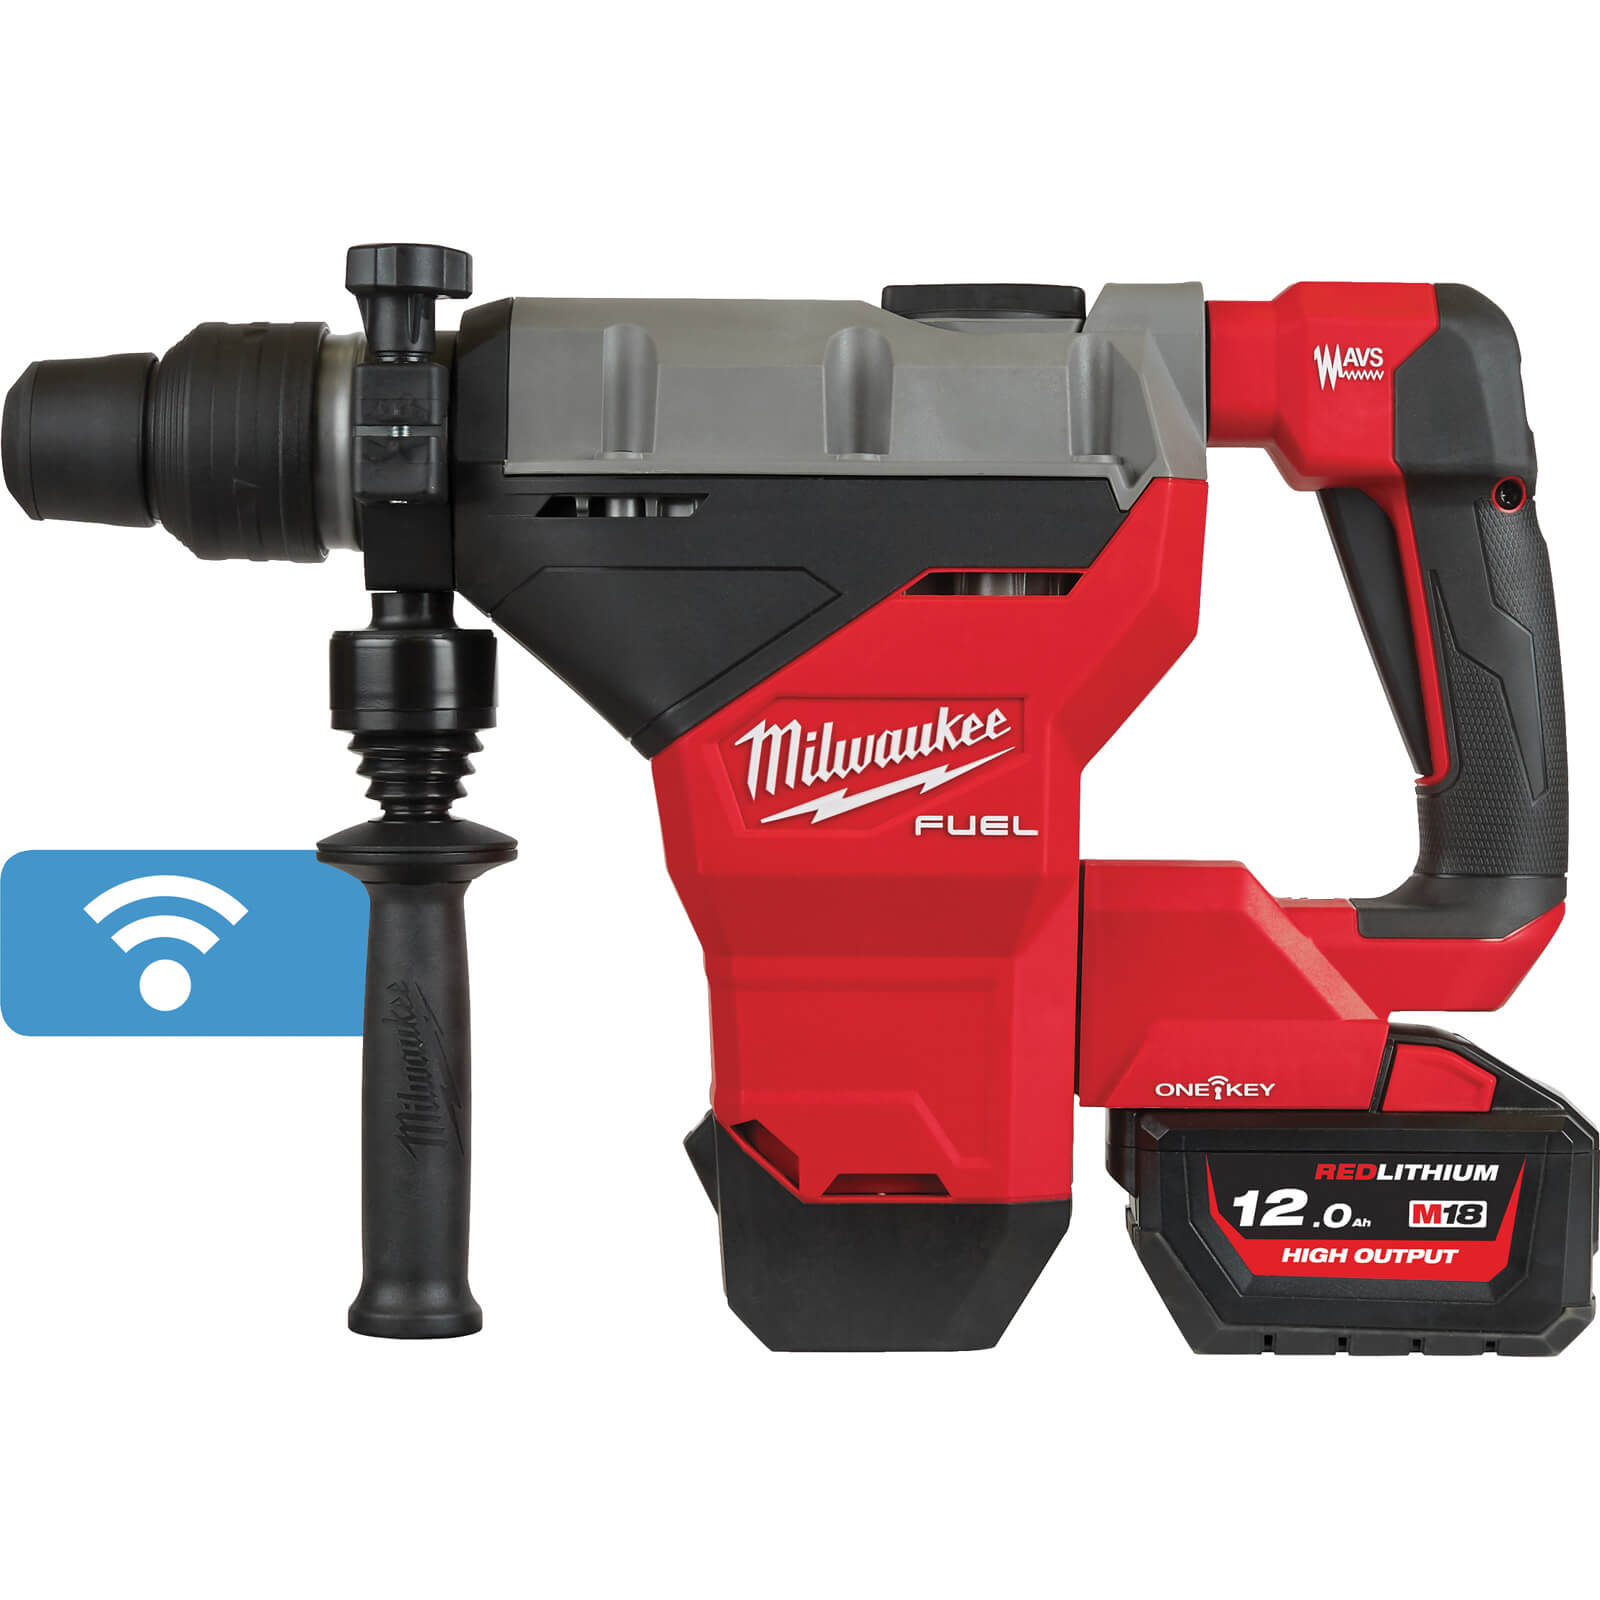 Image of Milwaukee M18 FHM Fuel 18v Cordless Brushless SDS Max Hammer Drill 1 x 12ah Li-ion Charger Case